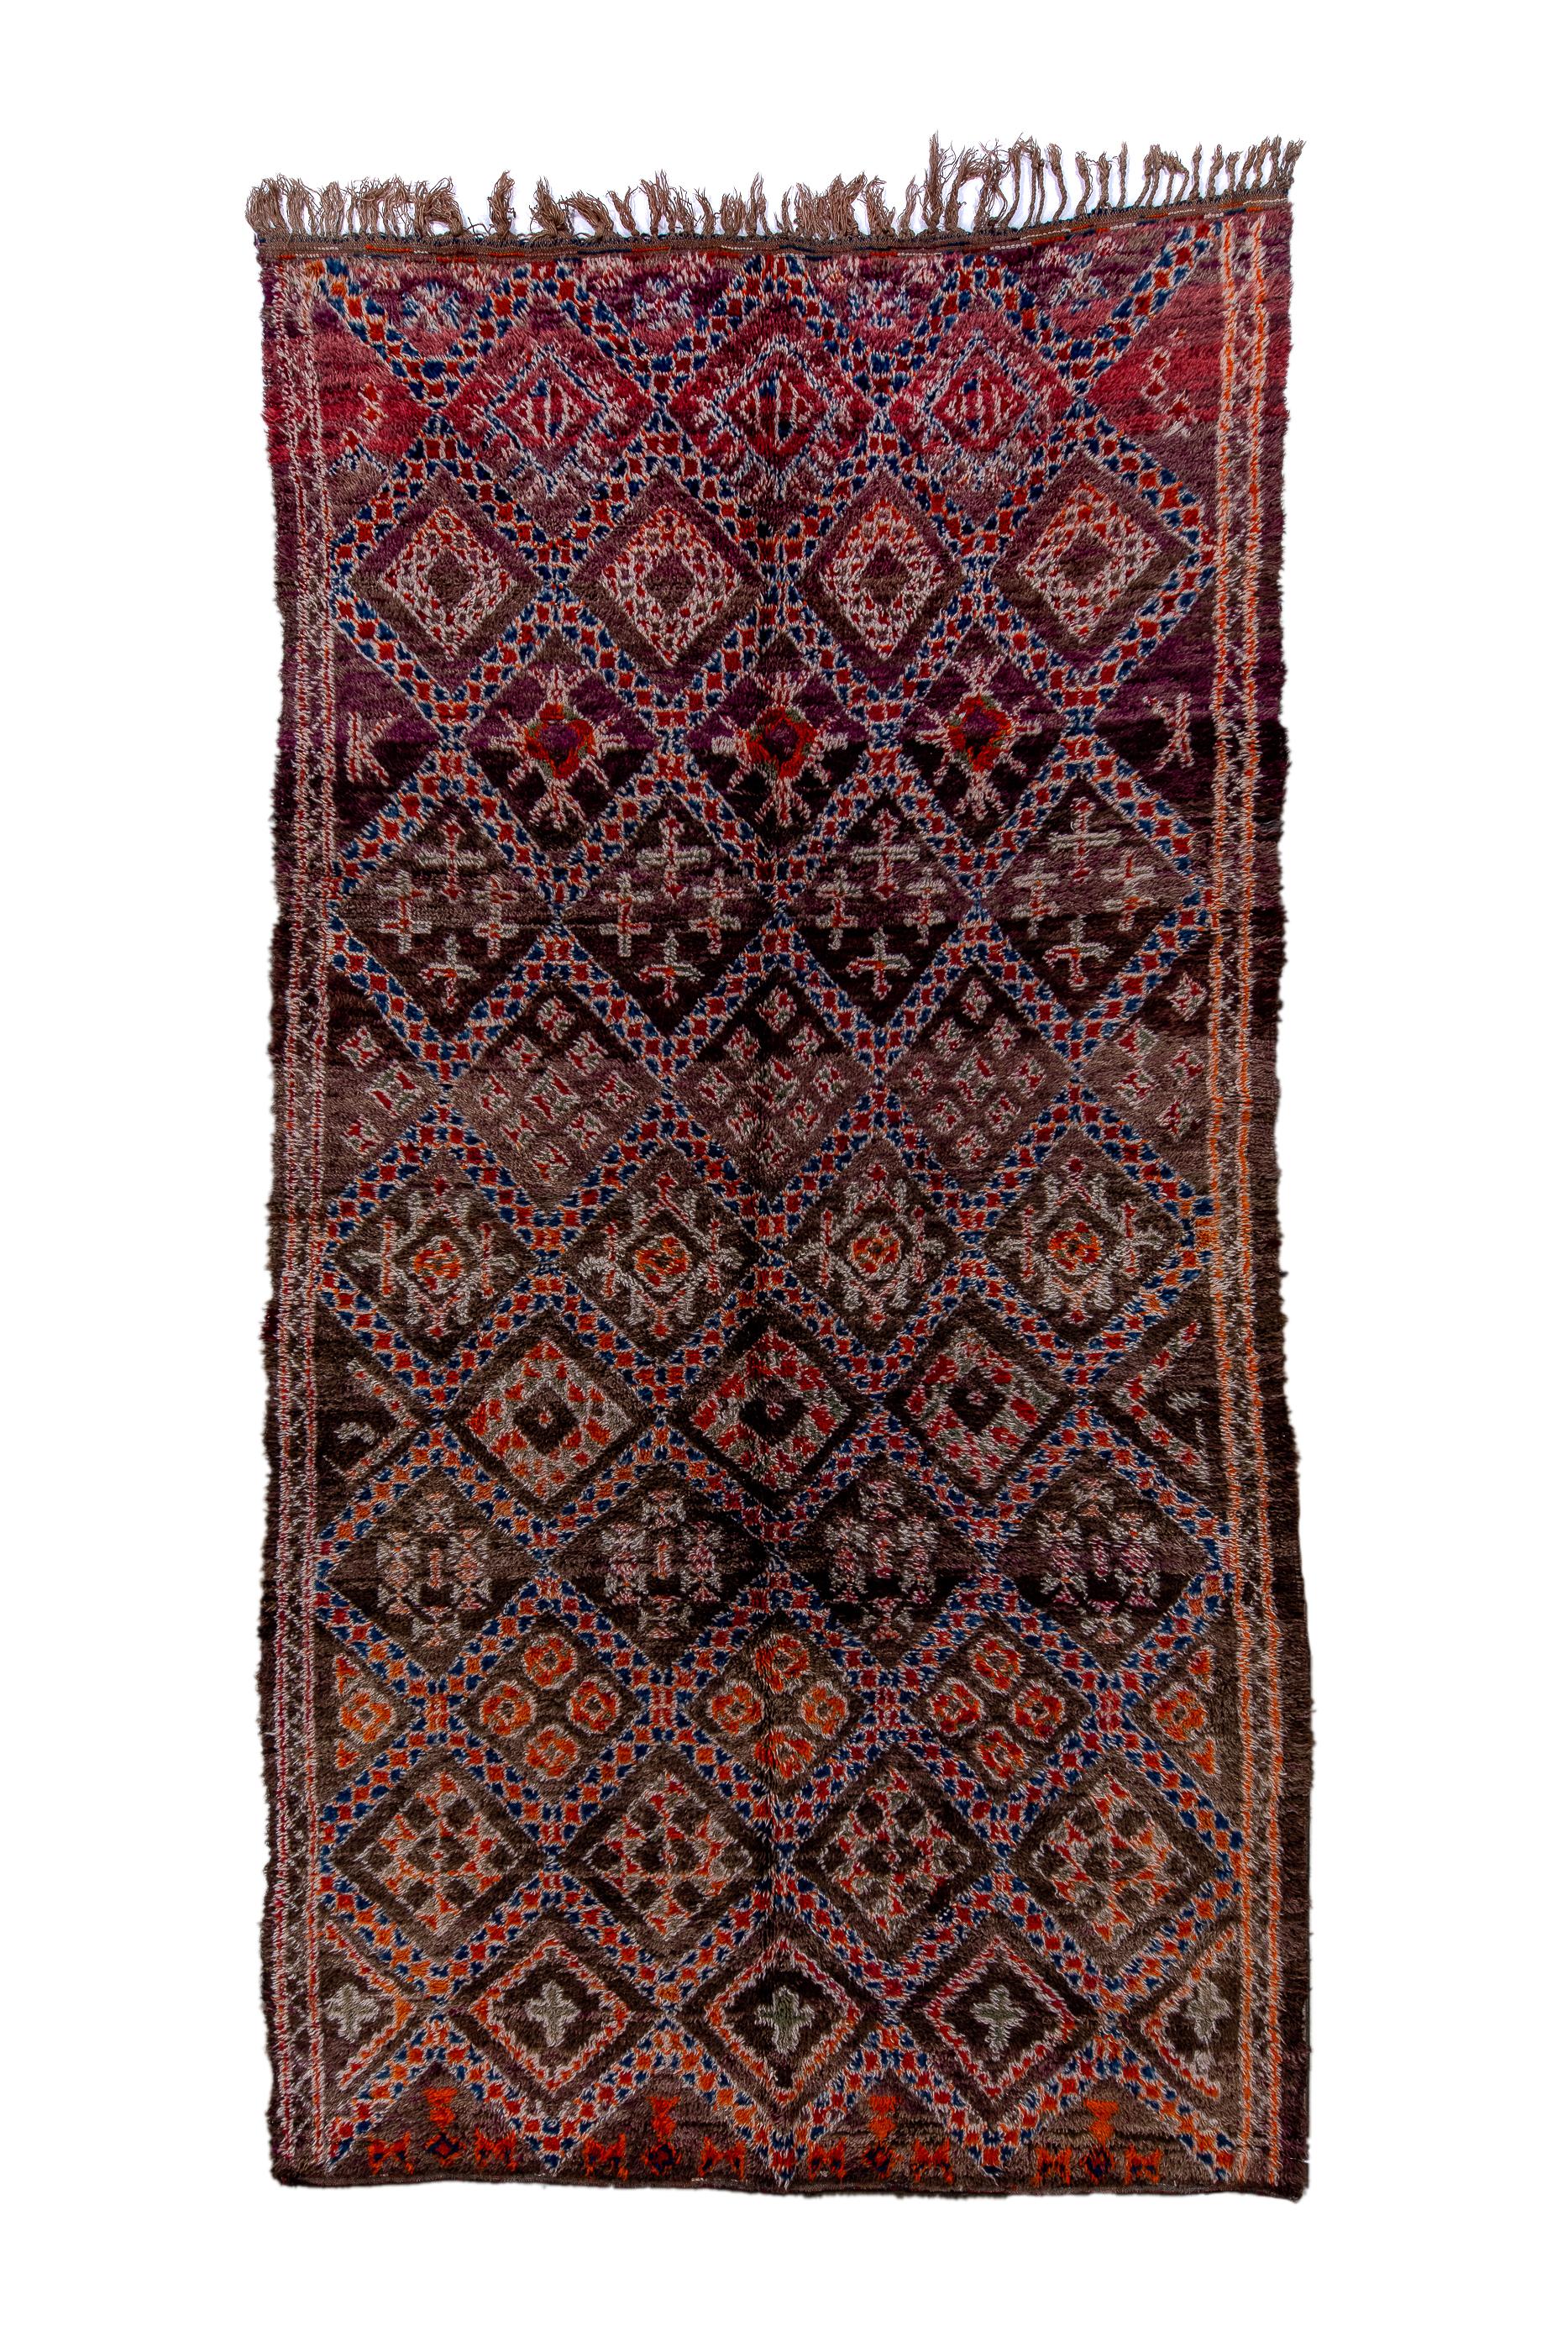 Coarsely woven on wool, this long pile tribal rug shows  a textured and thick lozenge lattice whose reserves enclose lozenges, ragged medallions, abstract floral crosses, and groups of small diamonds or octagons.  Row by row repetition across the